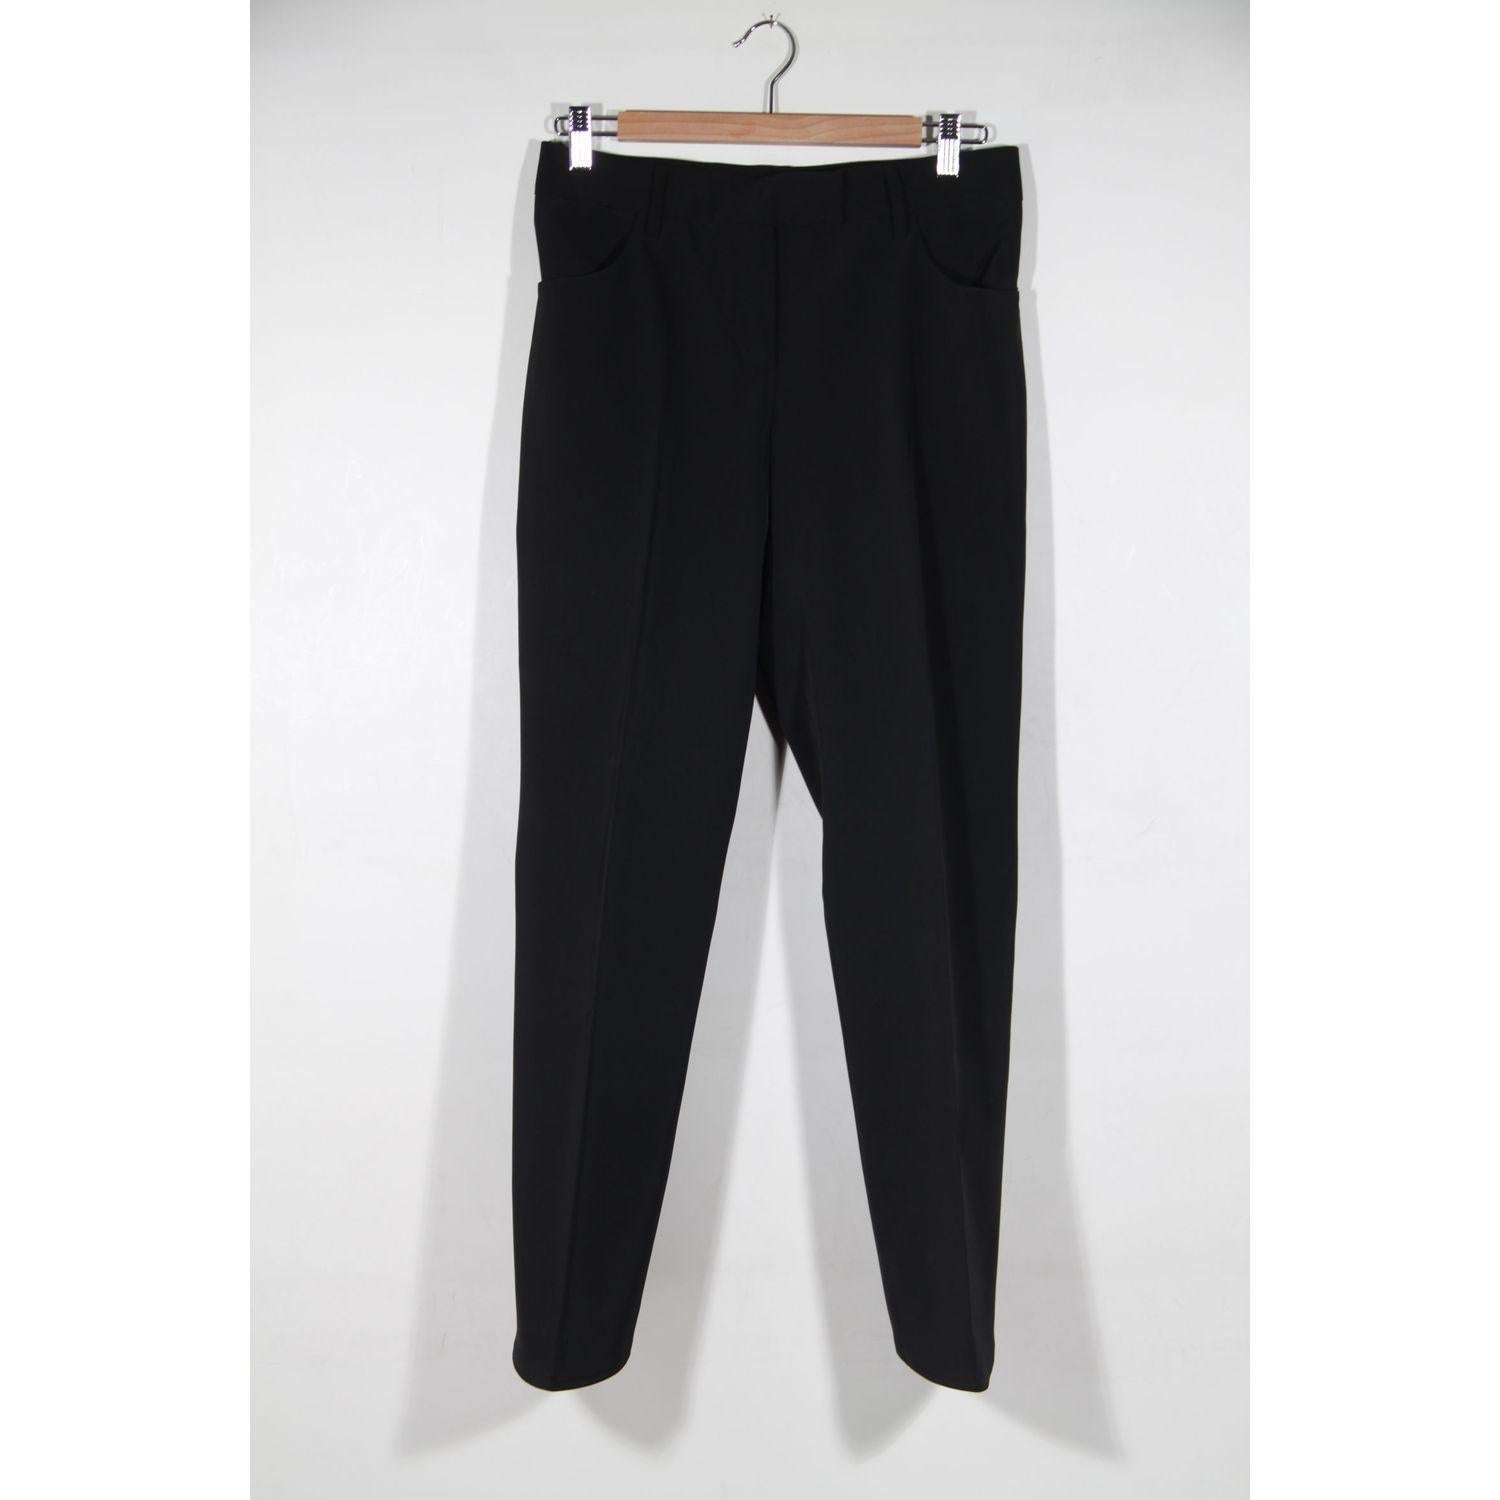 MATERIAL: Poly fabric COLOR: Black MODEL: Trousers GENDER: Women SIZE: Small COUNTRY OF MANUFACTURE: Condition CONDITION DETAILS: A :EXCELLENT CONDITION - Used once or twice. Looks mint. Imperceptible signs of wear may be present due to storage